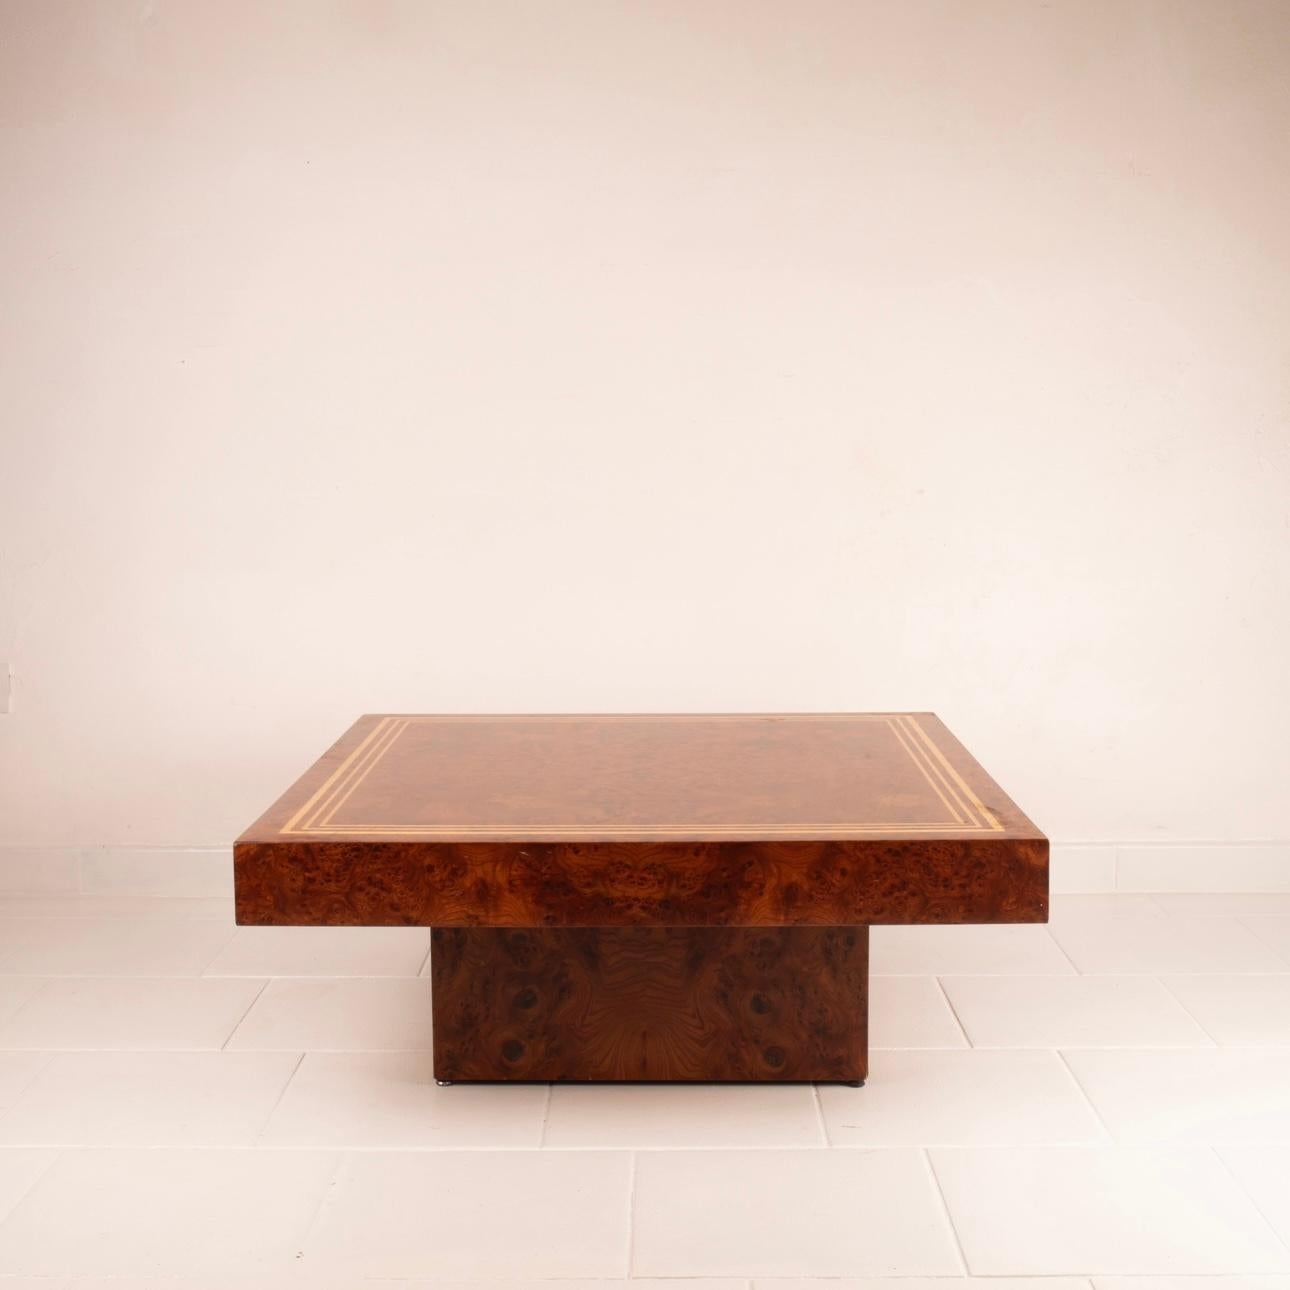 Discover this magnificent coffee table in wood veneer with burl essence and maple profiles, a masterpiece of 1970s design designed and produced by Fabrizio Smania for Studio Smania Interni.
This coffee table belongs to the prestigious 